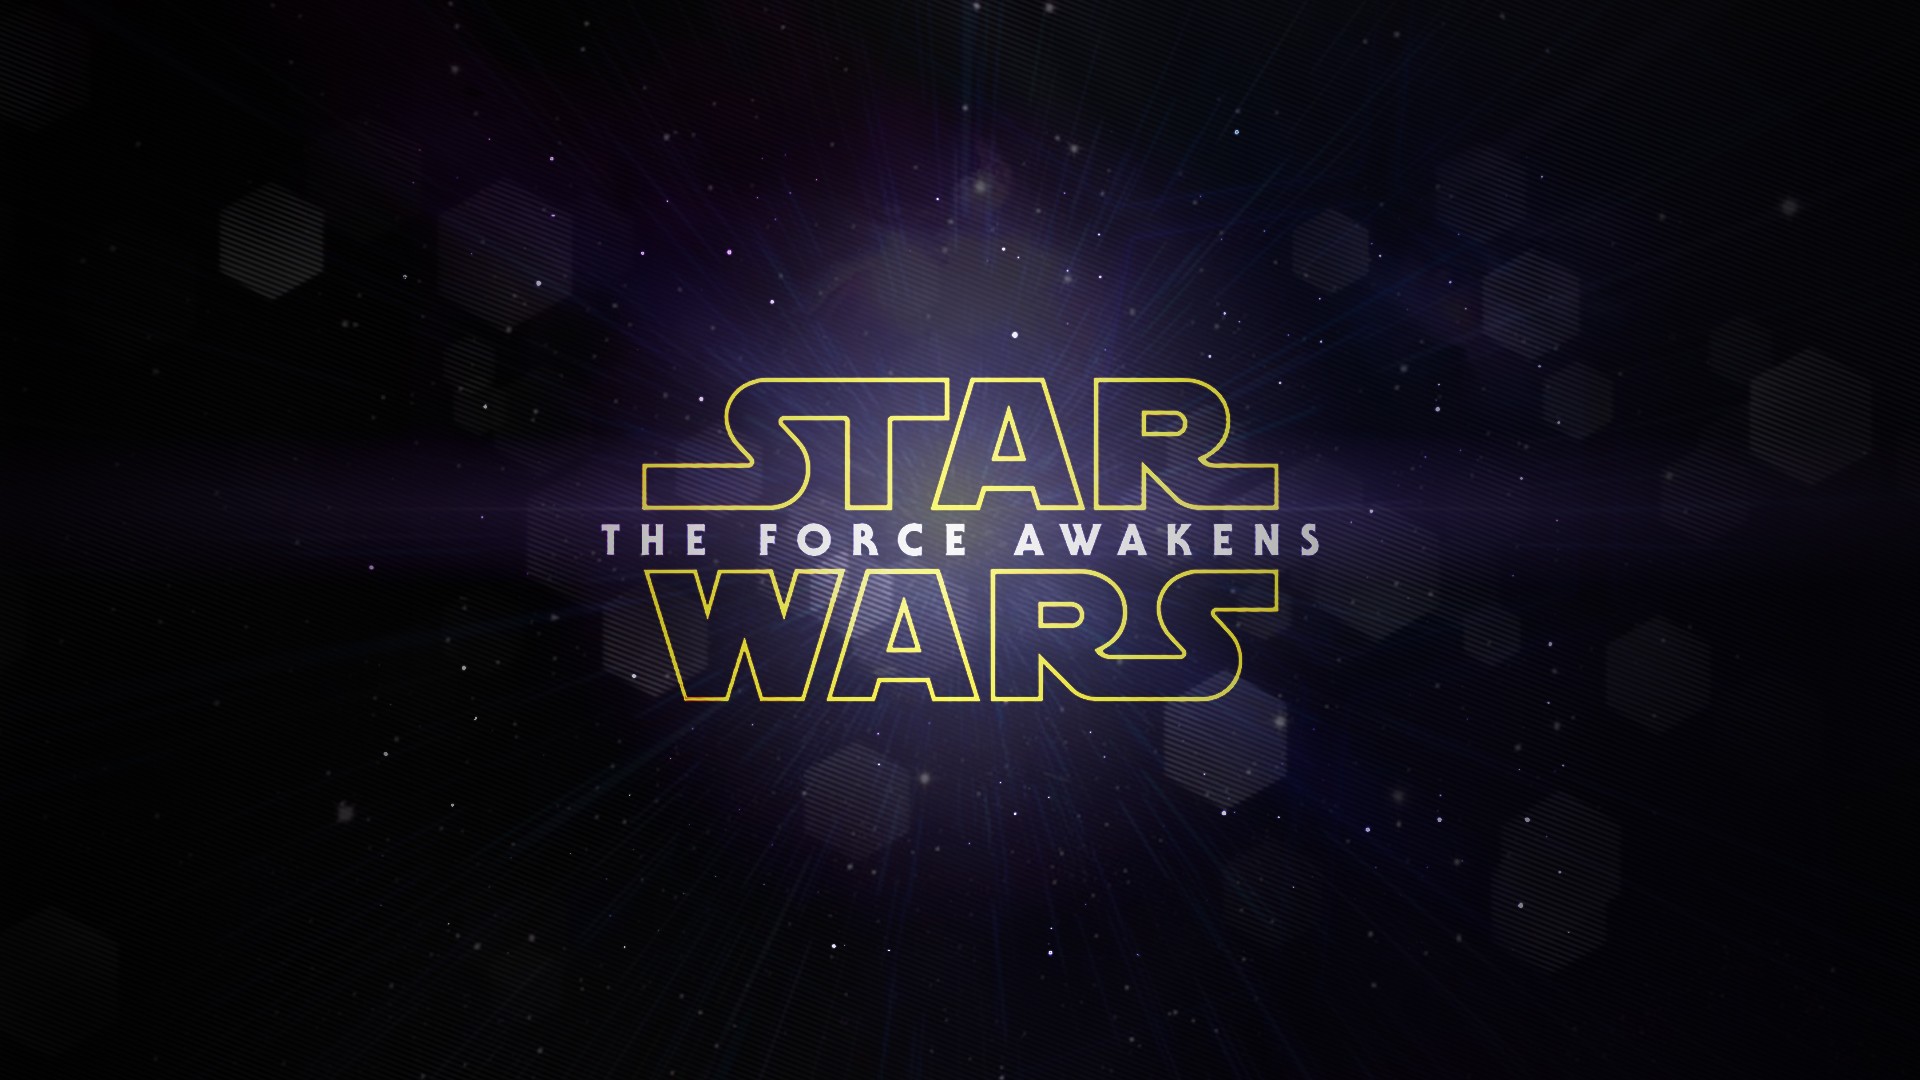 Star Wars The Force Awakens Movies 2015 Year Science Fiction Star Wars 1920x1080